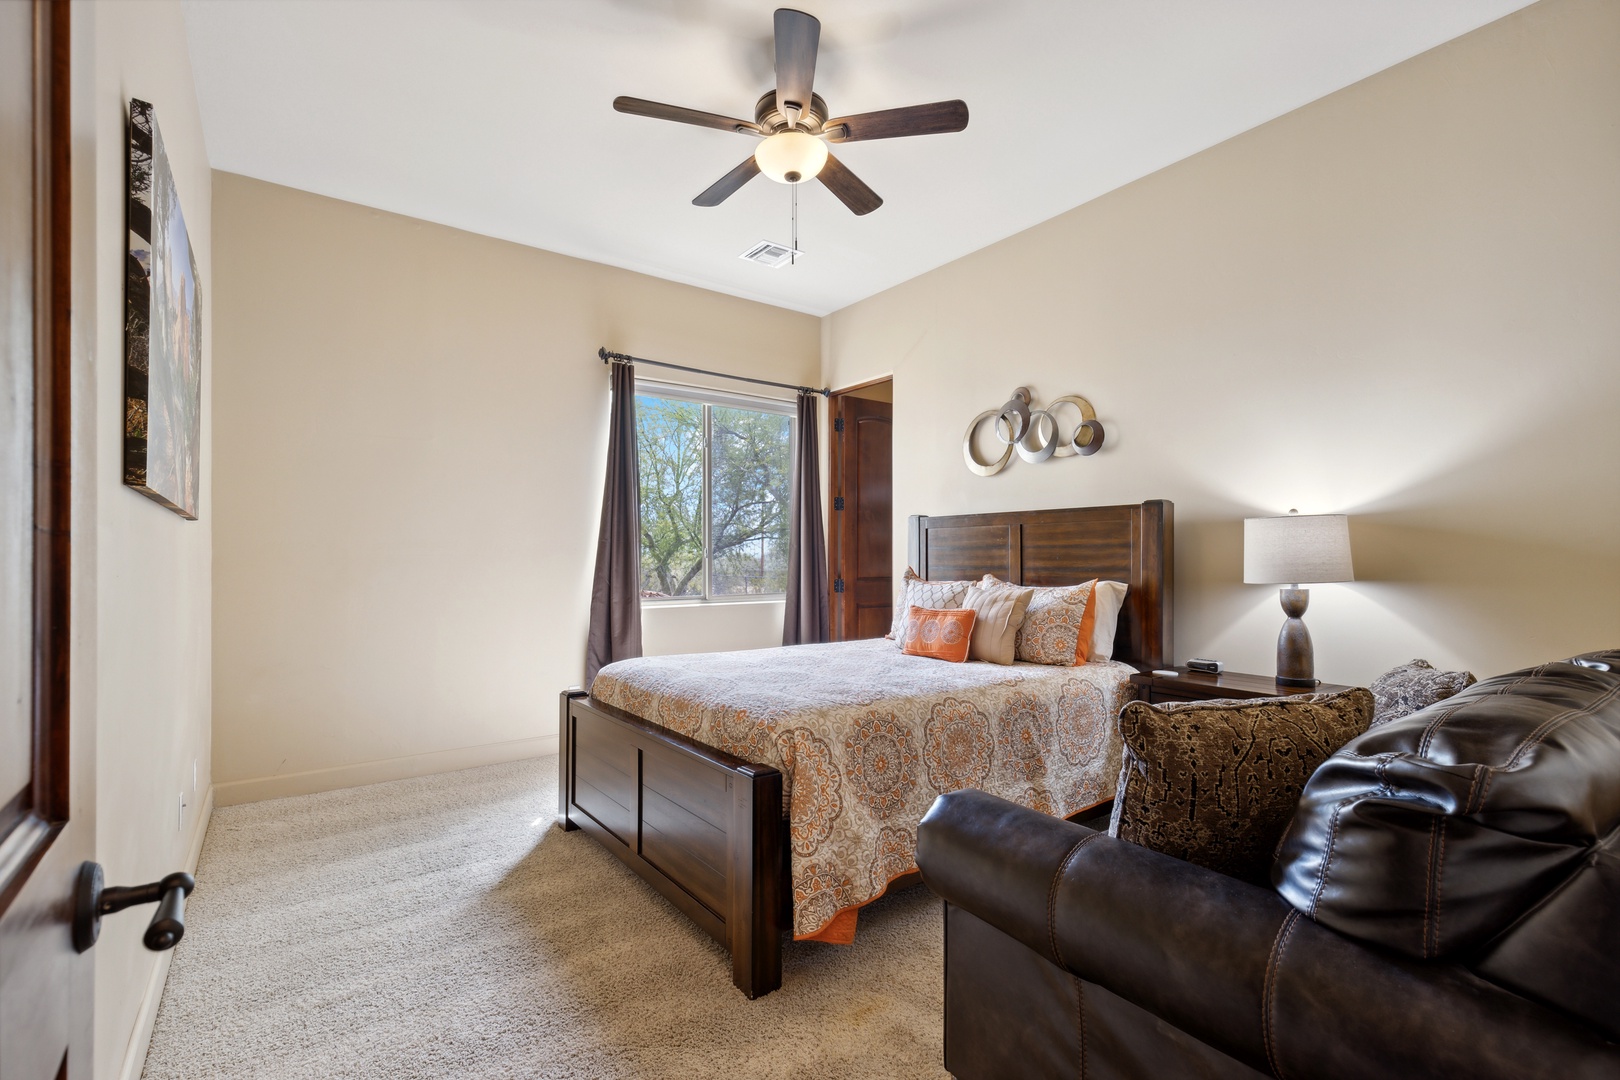 This bedroom includes a comfy queen bed & couch